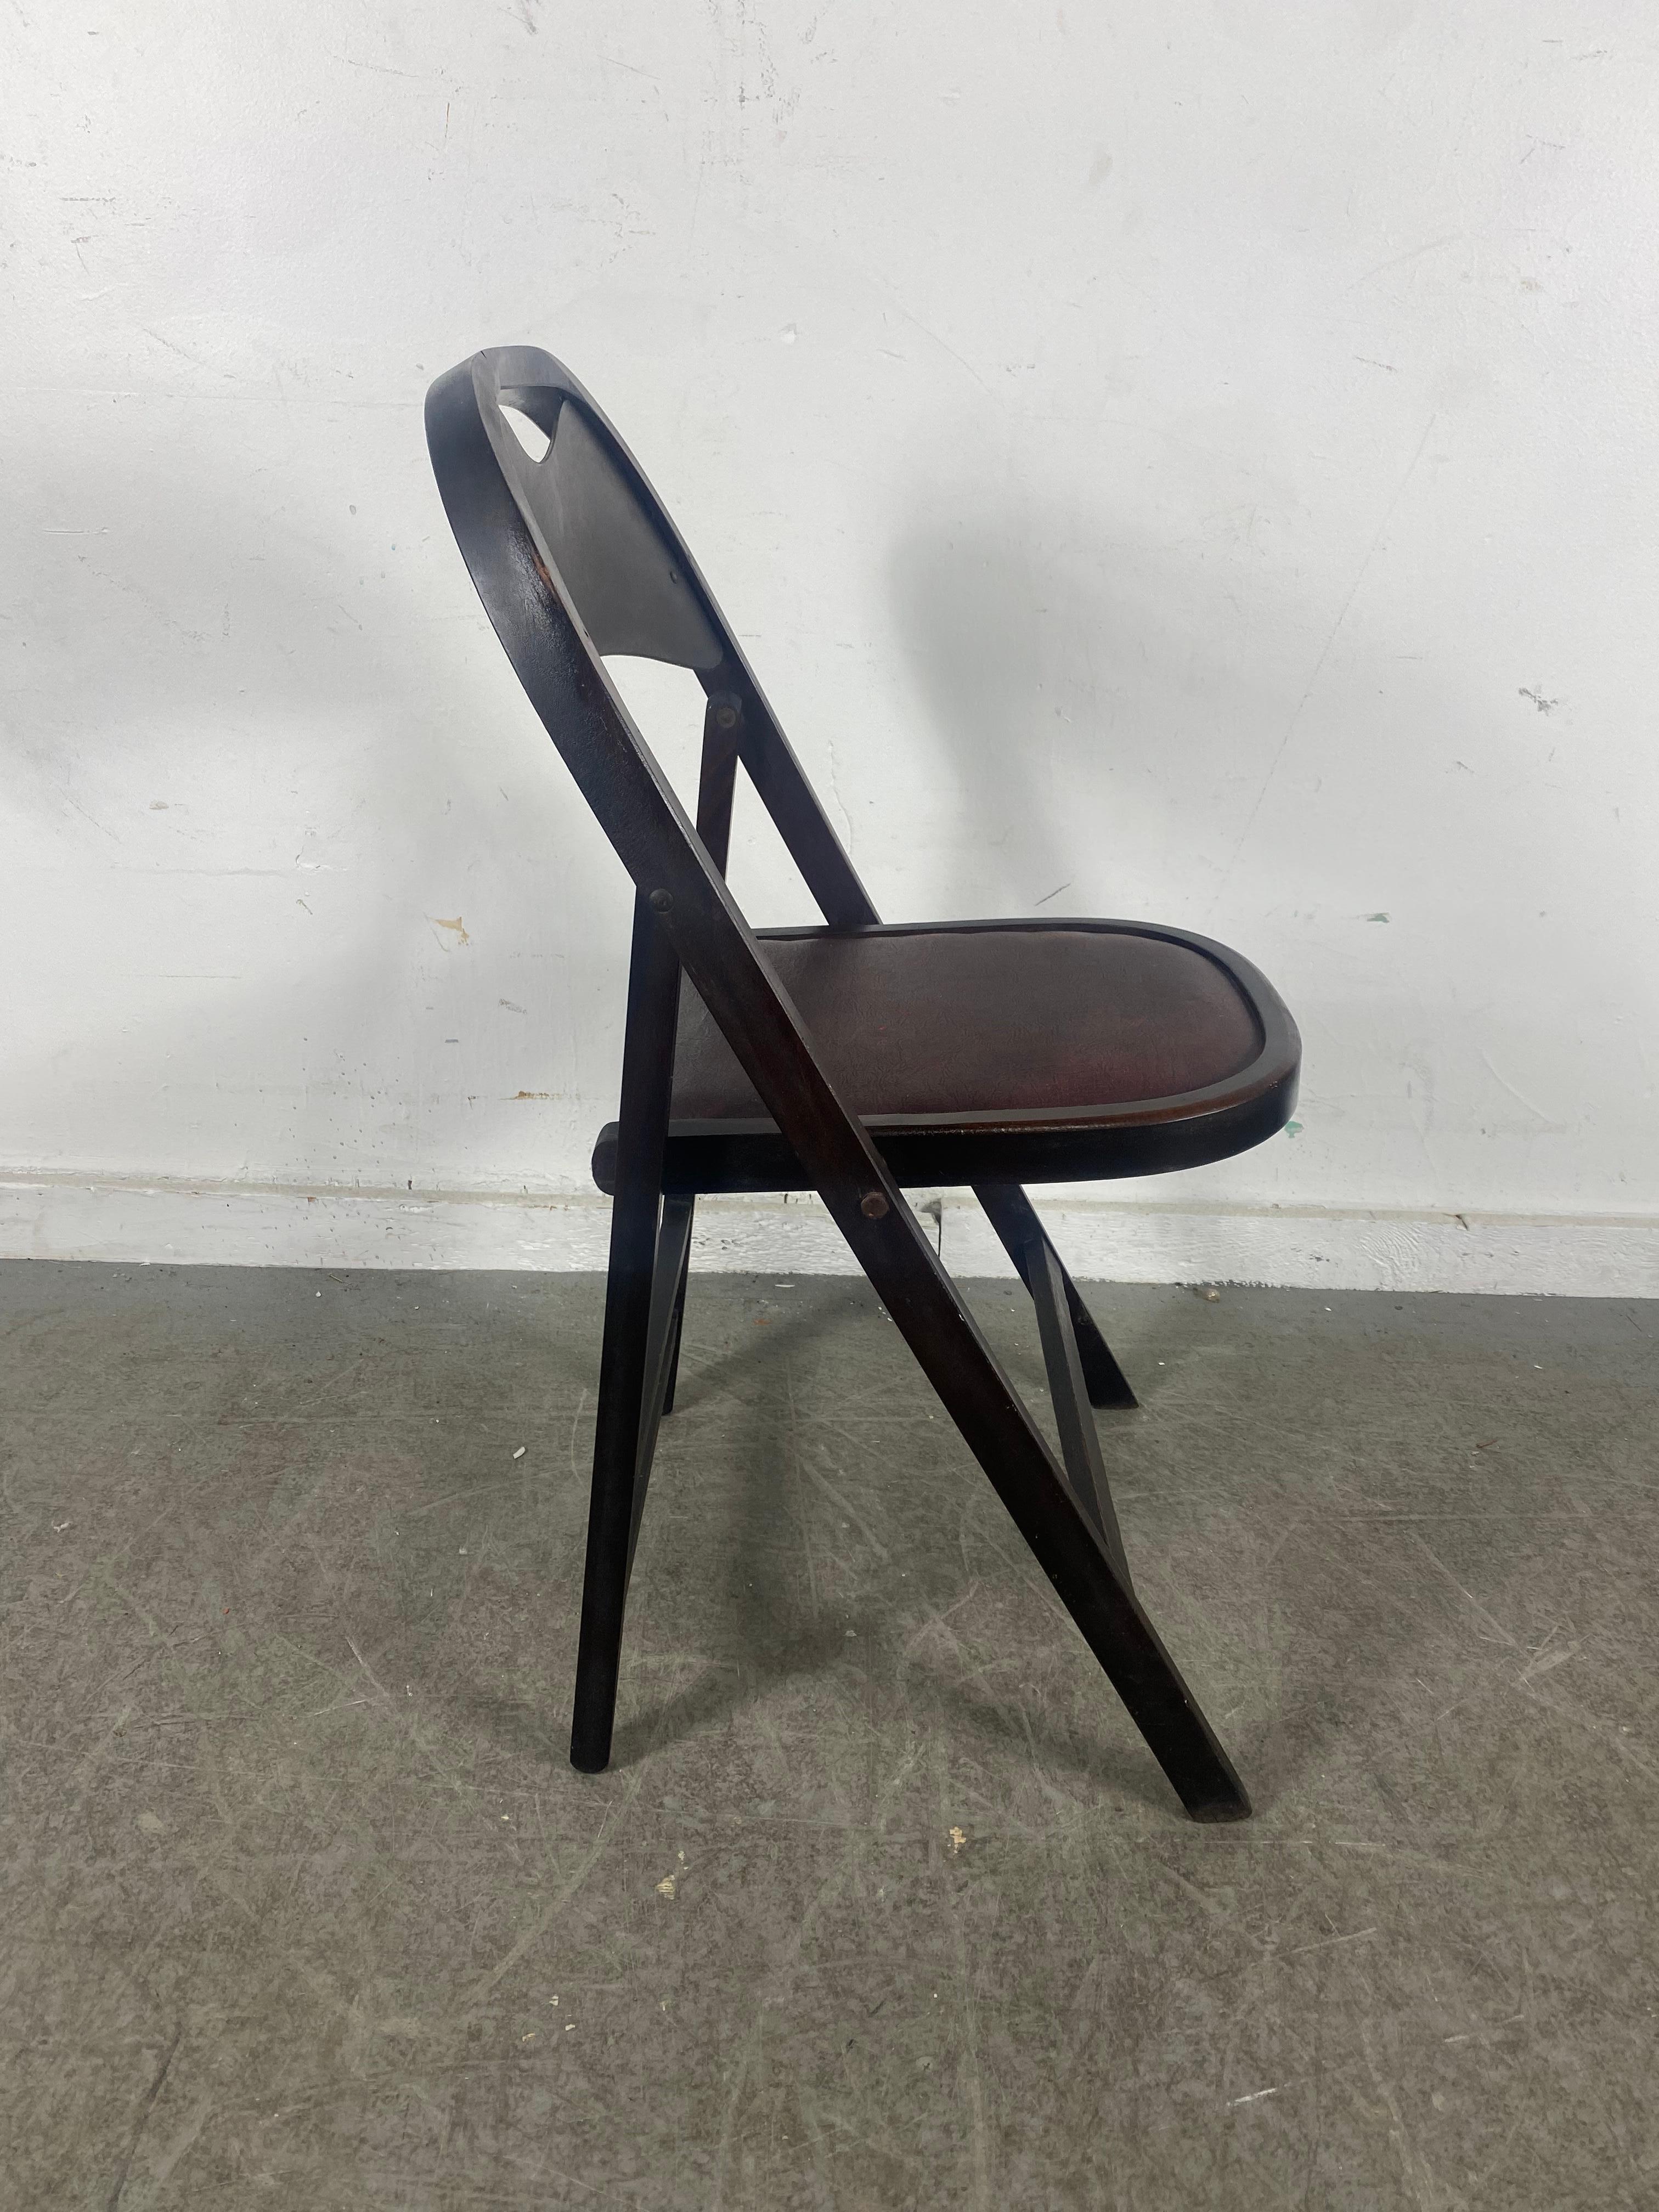 Set 4 Classic Bauhaus Thonet Style Folding Chairs manufactured by Stakmore In Good Condition For Sale In Buffalo, NY